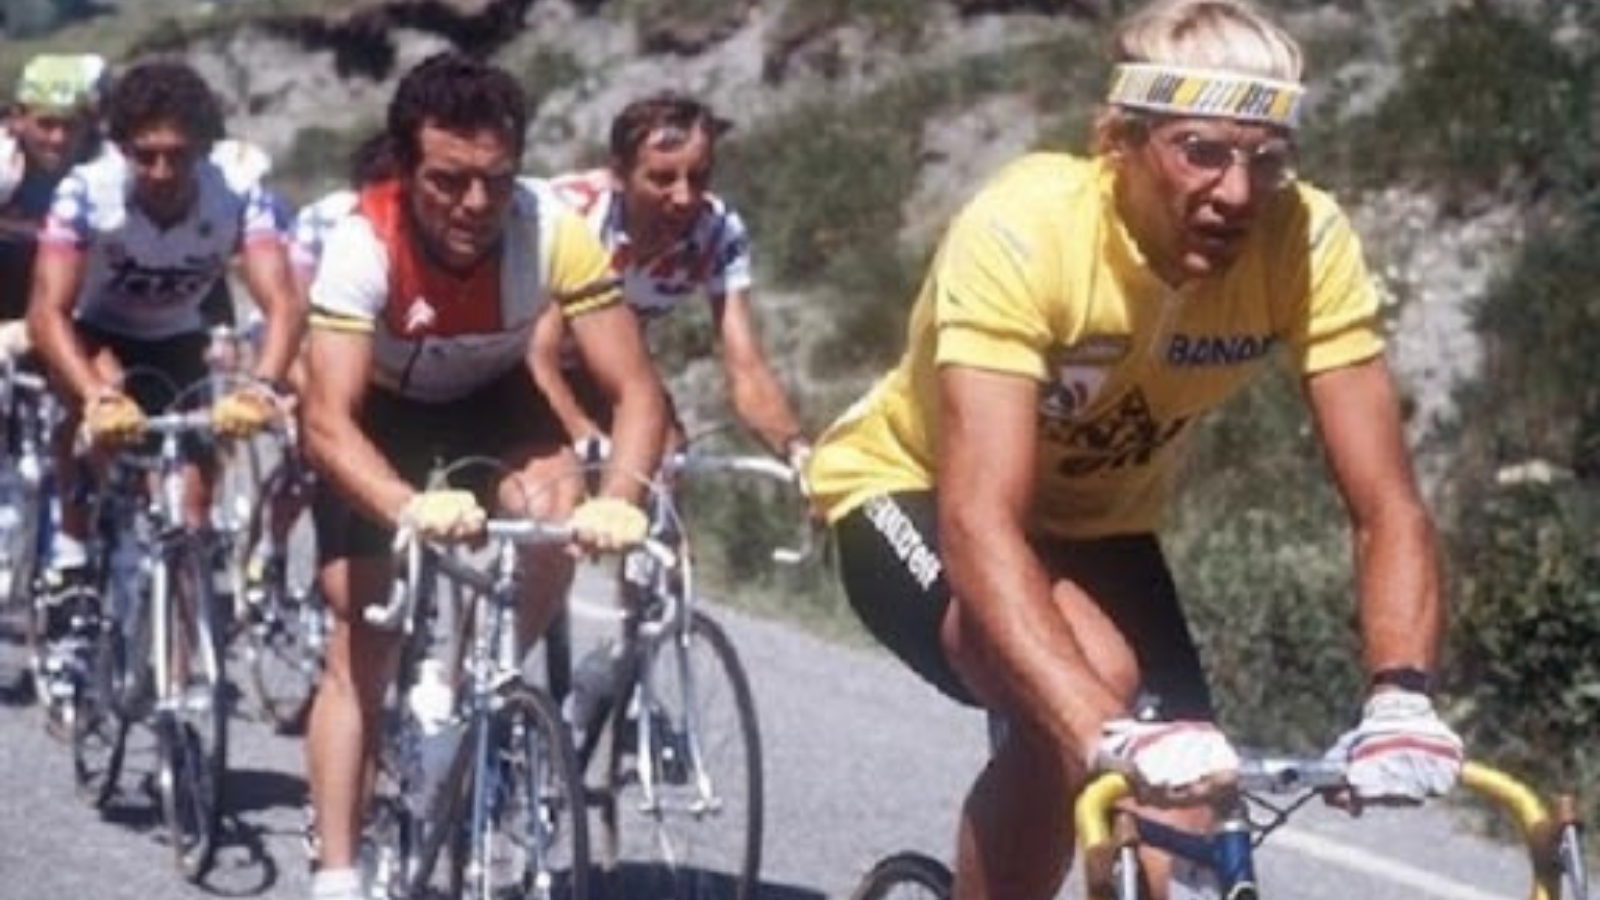 A moment from Tour de France 1984 with Bernard Hinault and Laurent Fignon, who wears the yellow jersey.